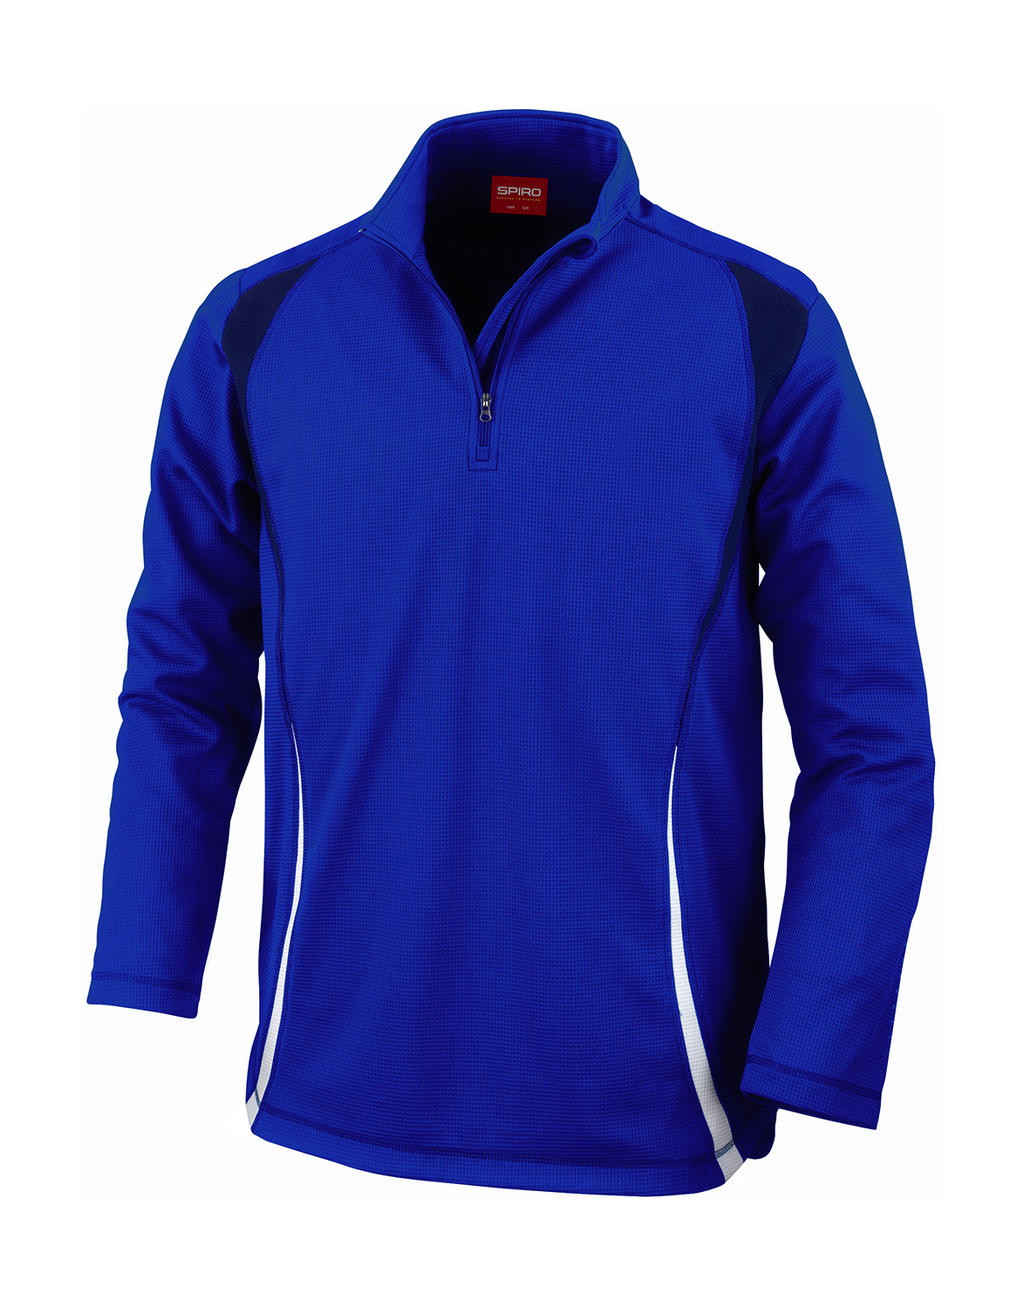  Spiro Trial Training Top in Farbe Royal/Navy/White